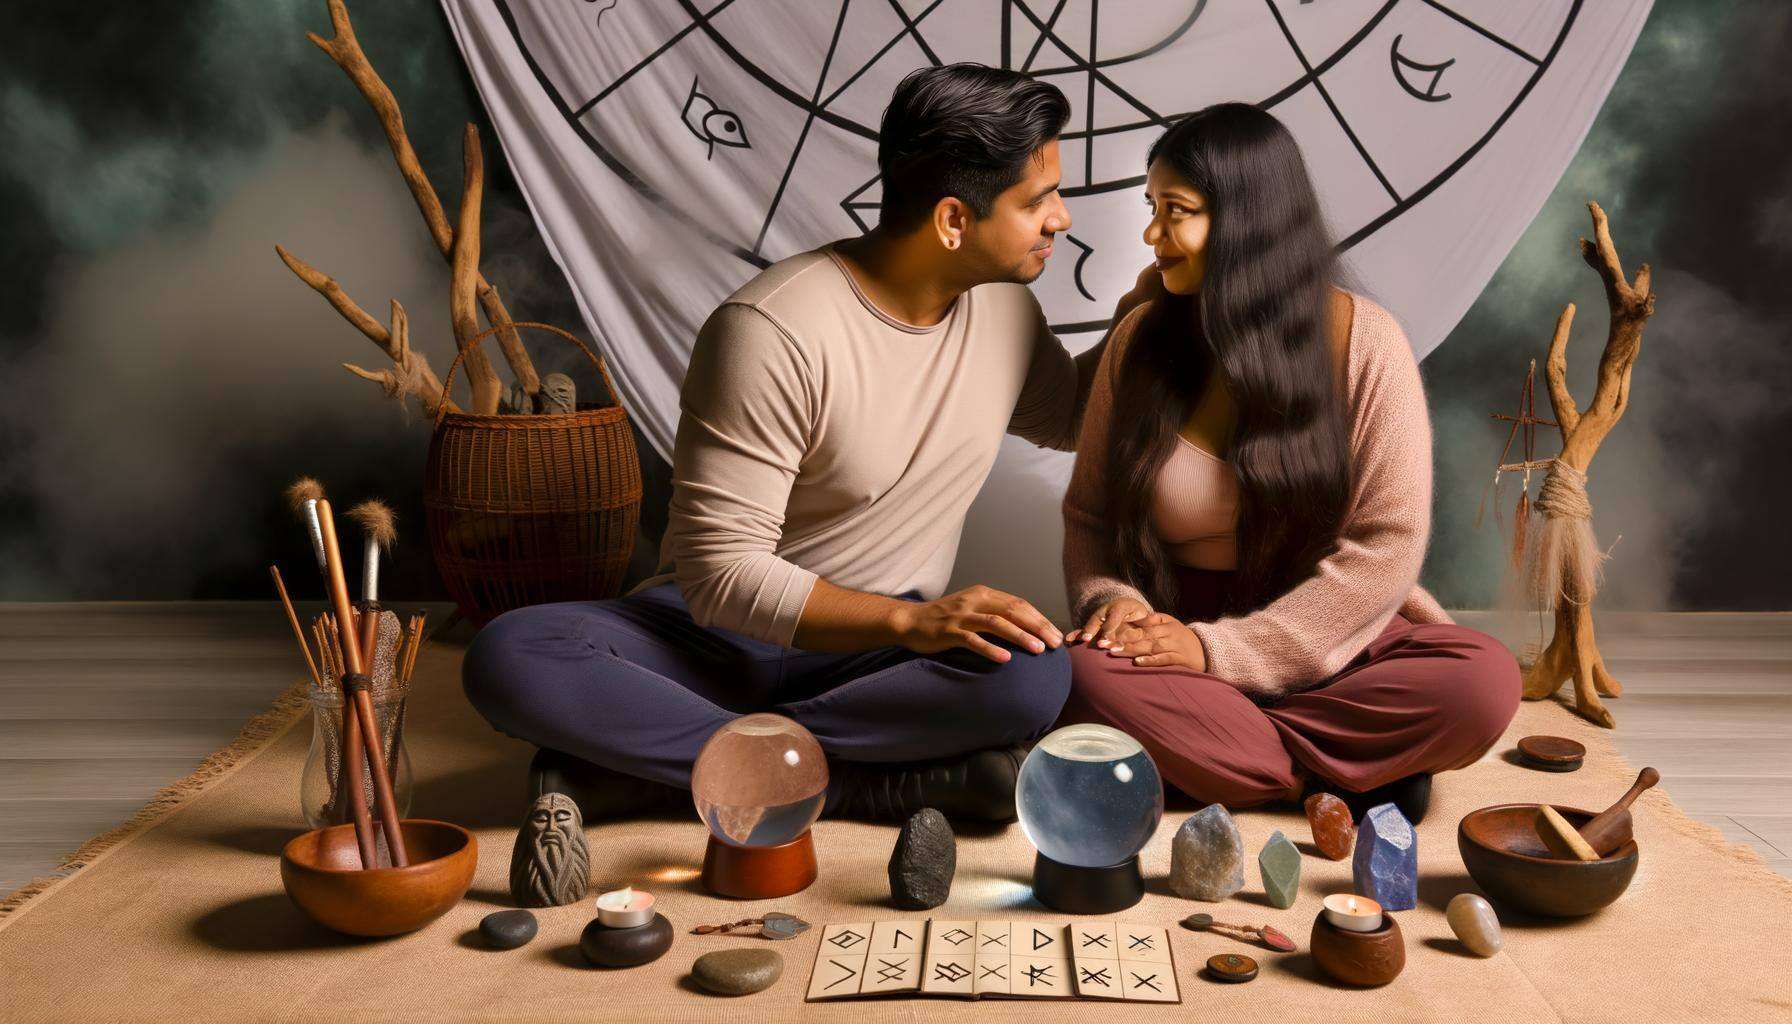 An image of a couple engaged in a traditional healing ritual, surrounded by symbols of ancient wisdom and modern therapeutic tools